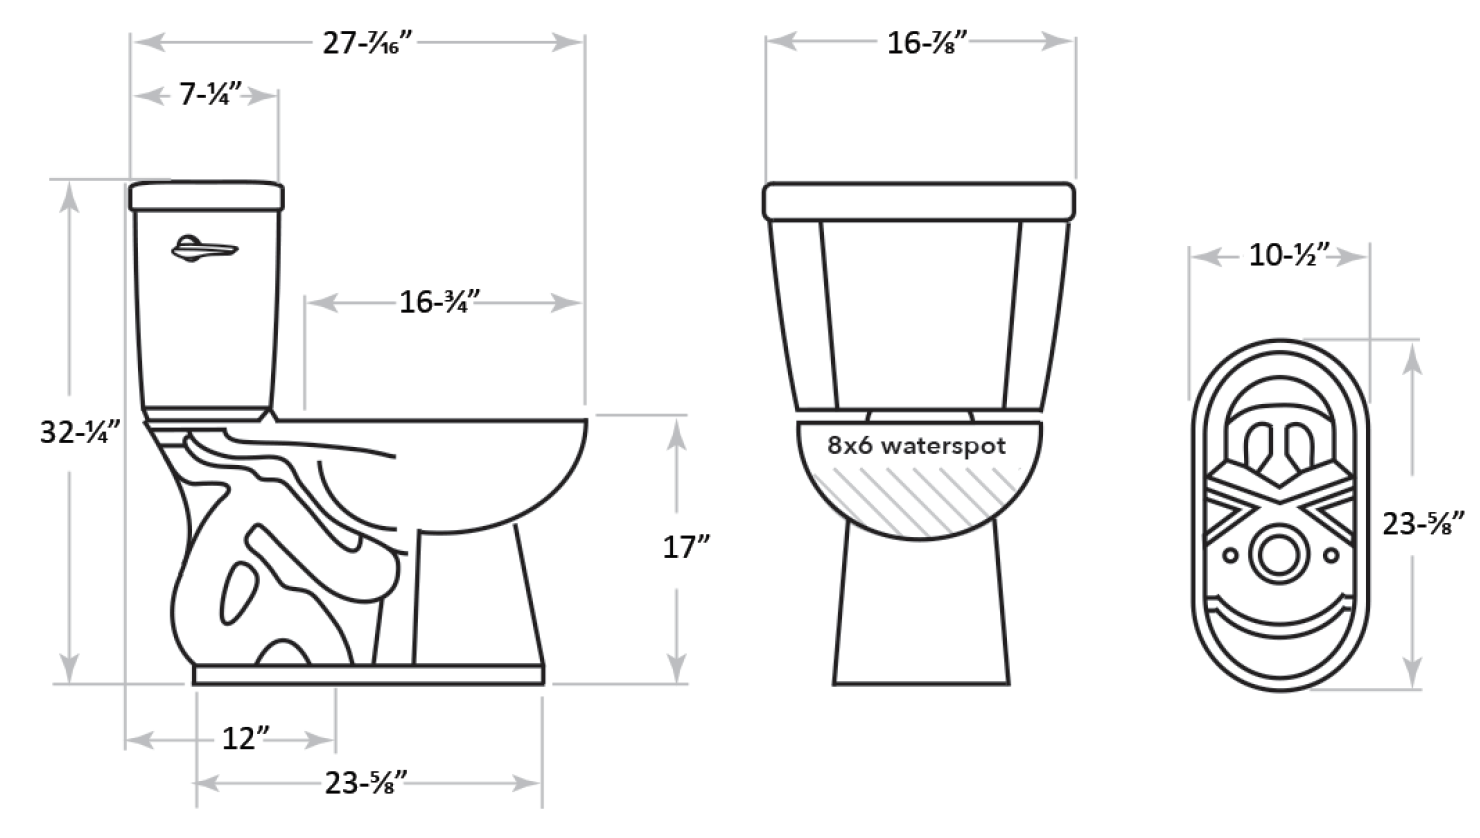 Sabre round bowl ADA toilet technical info